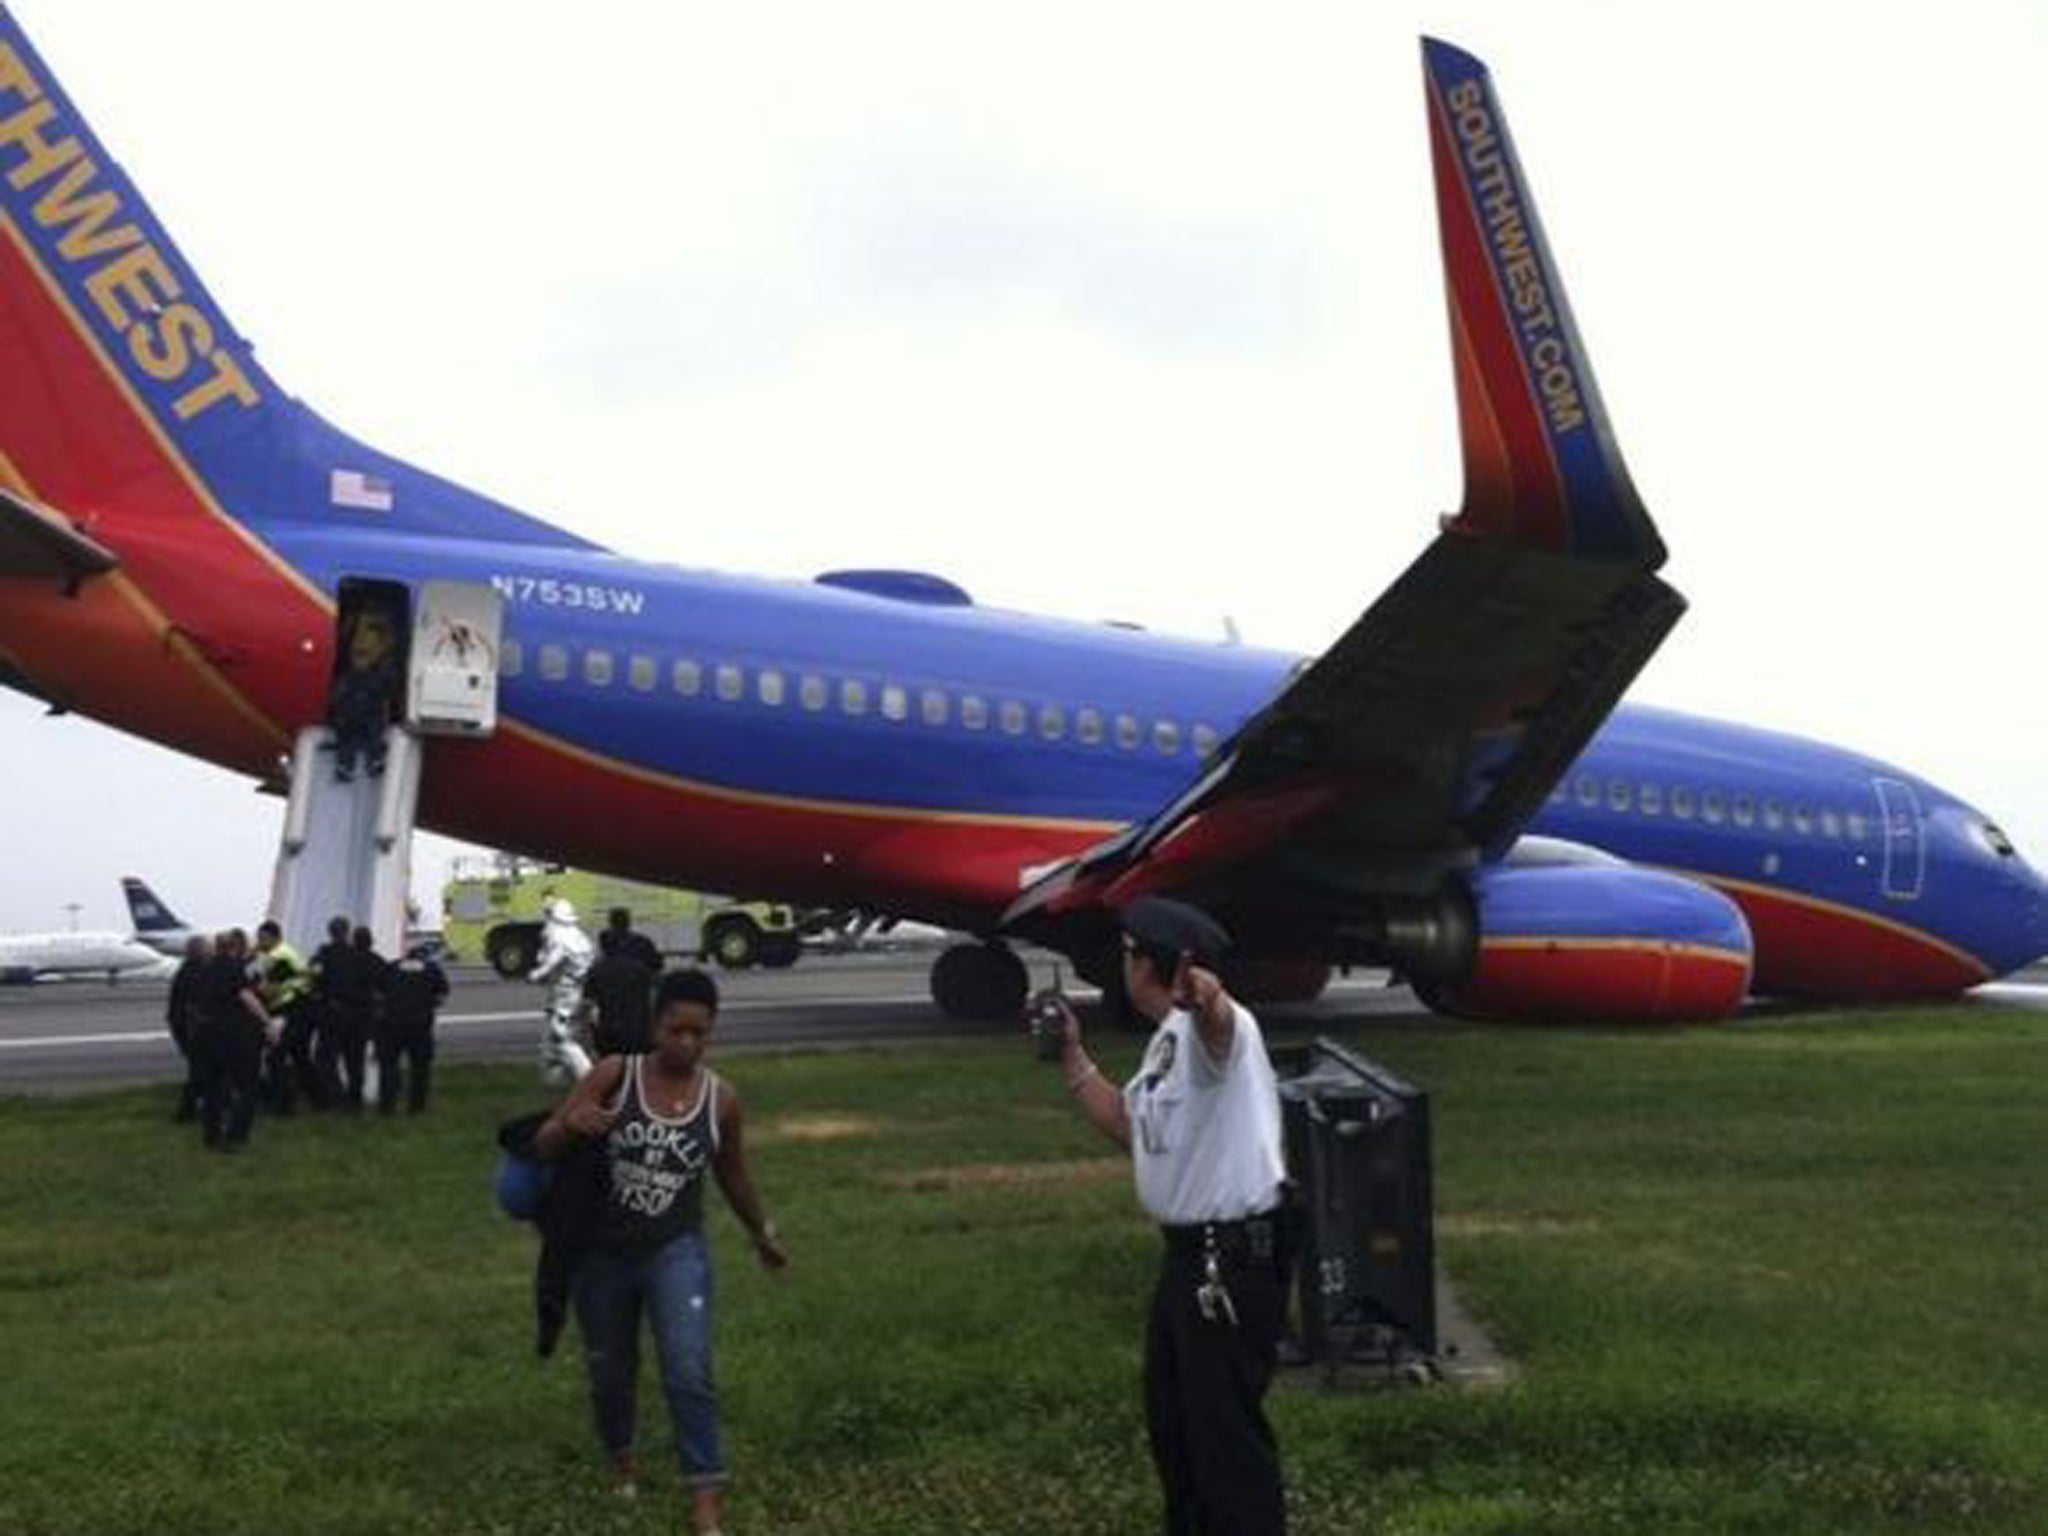 The Southwest Airlines plane sits on the tarmac as passengers disembark at LaGuardia airport, New York